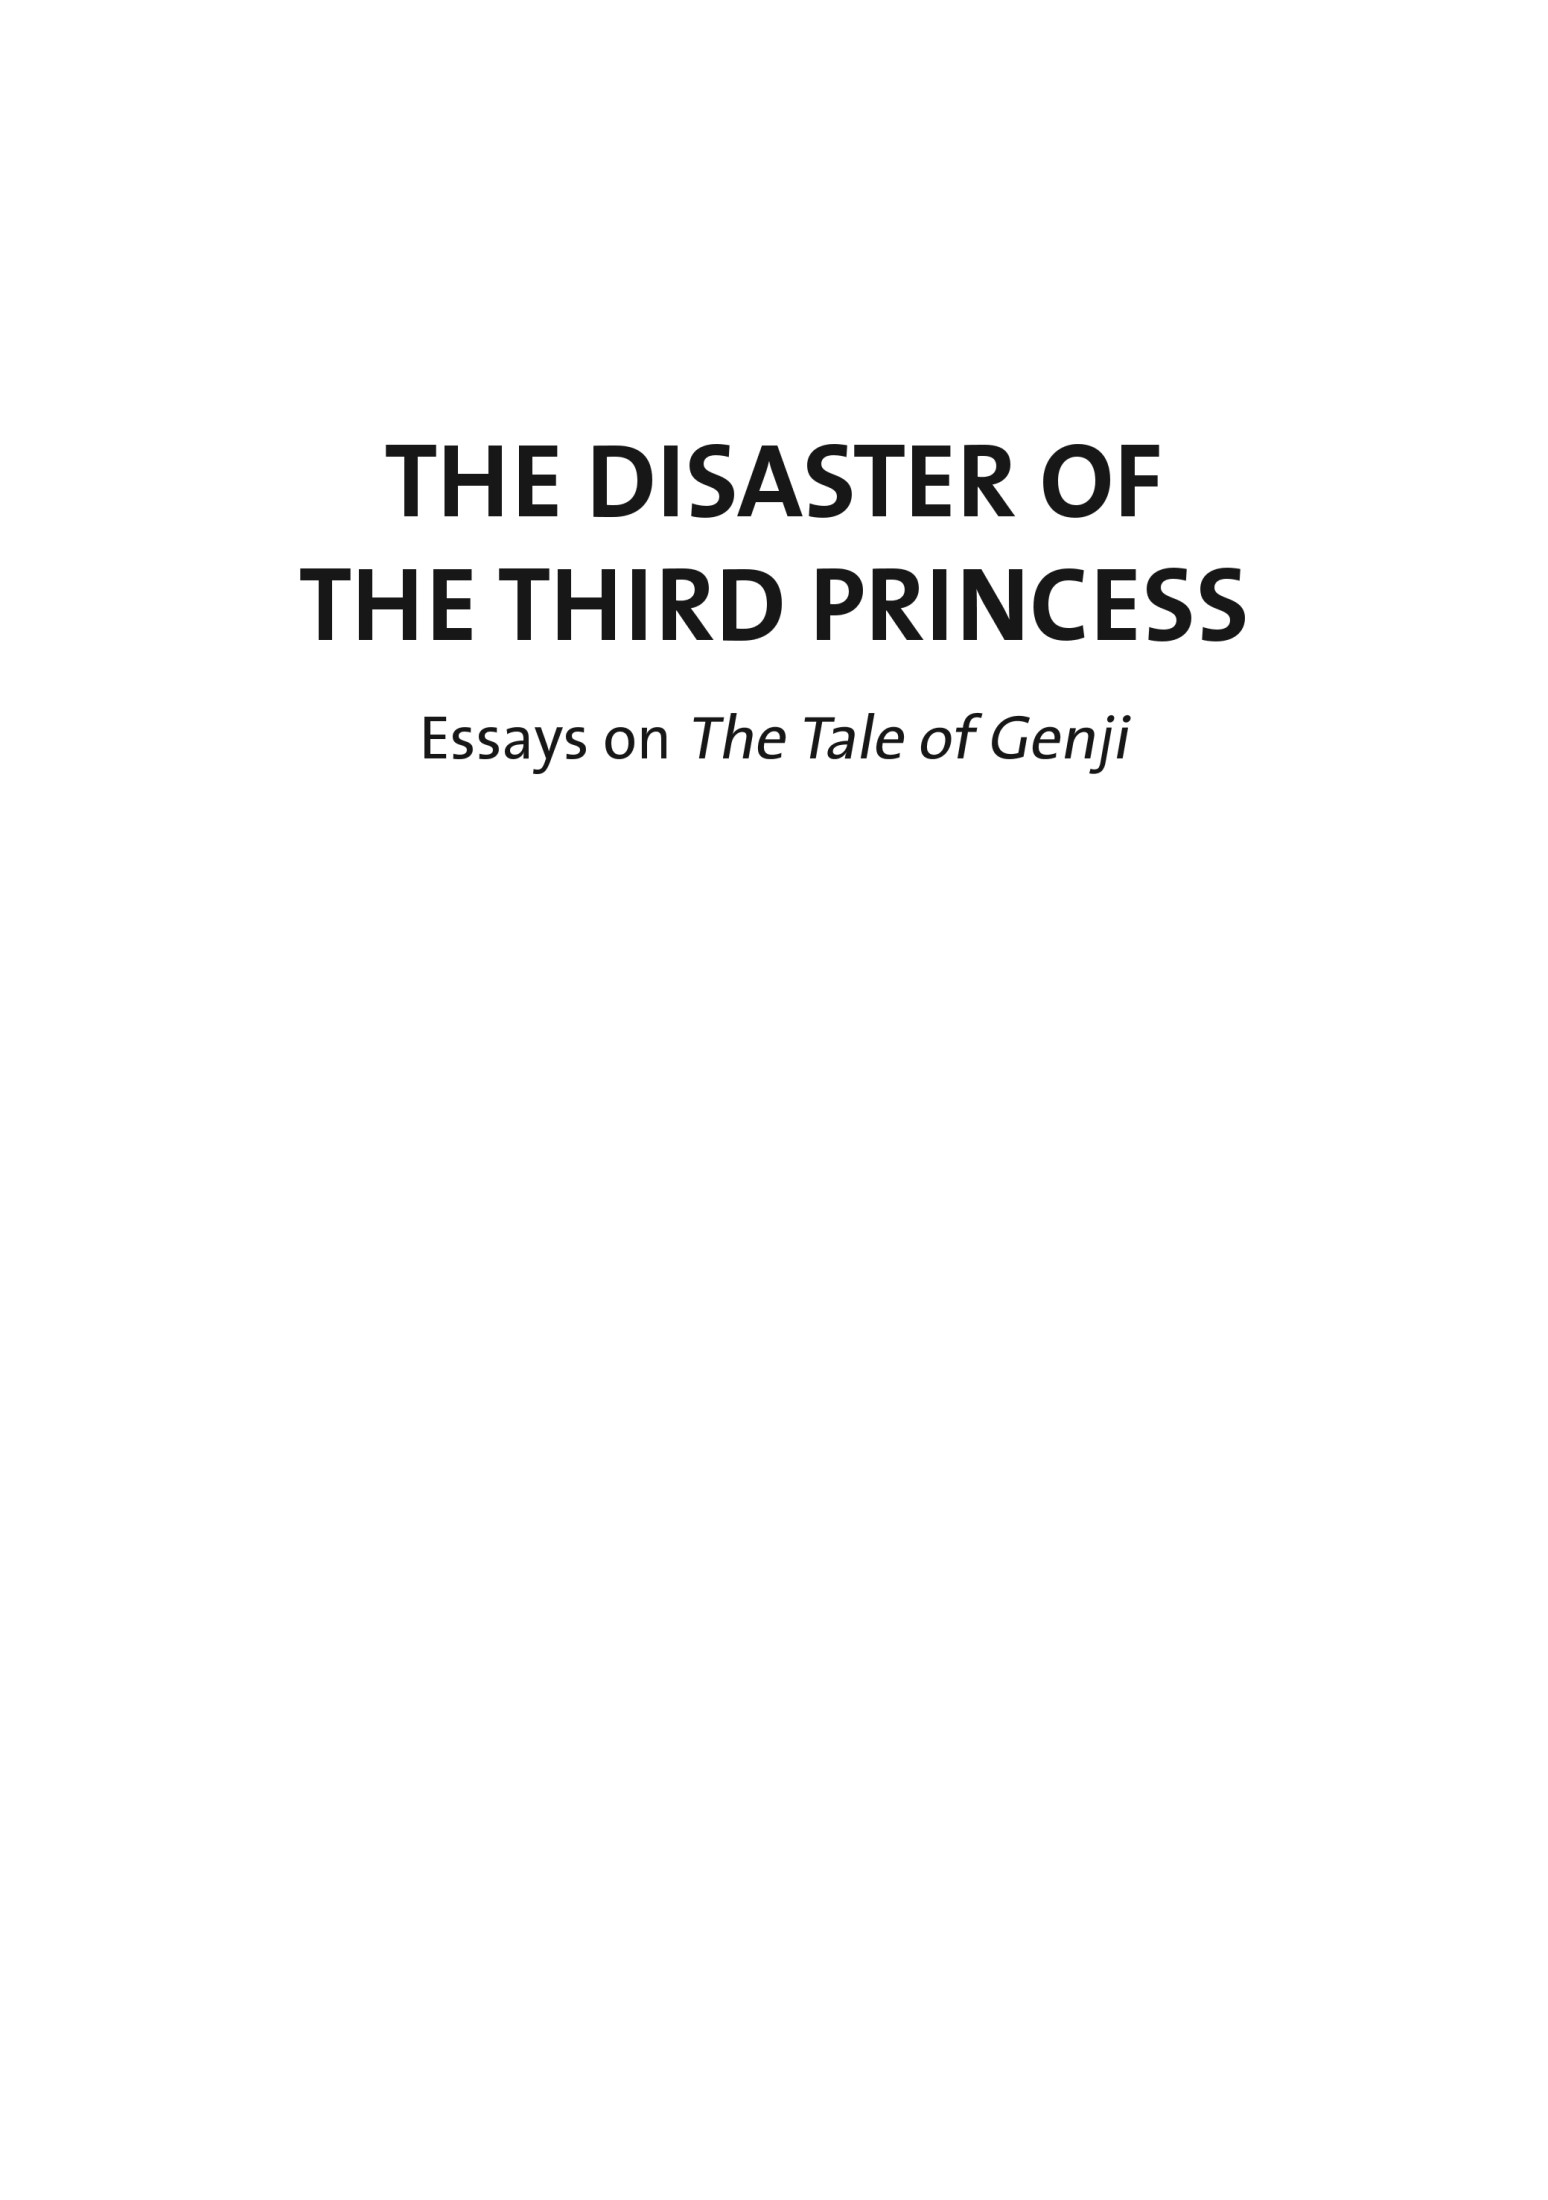 The Disaster of the Third Princess: Essays on the Tale of Genji